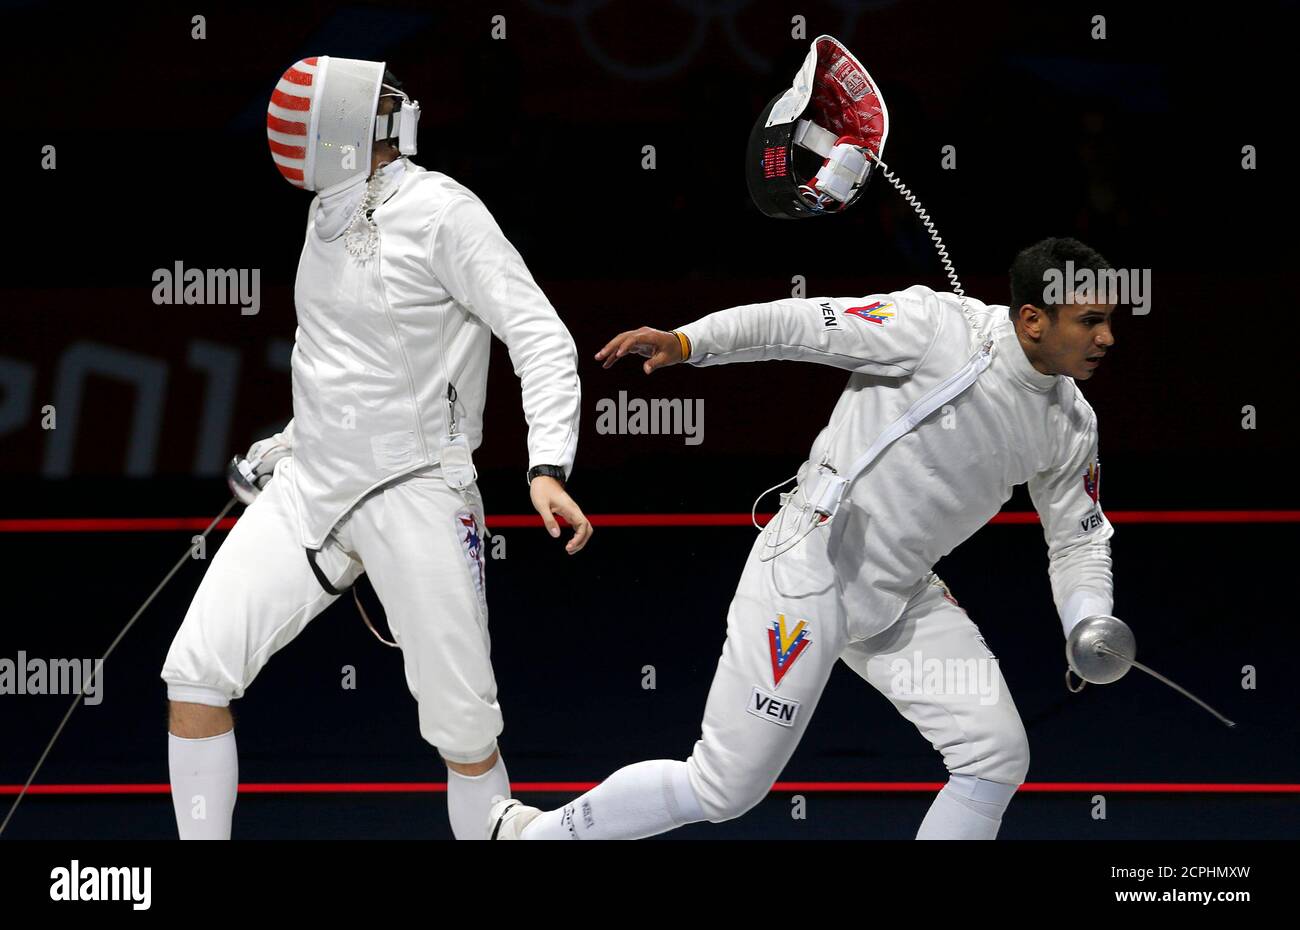 Venezuela's Ruben Limardo Gascon (R) reacts as he beats Seth Kelsey of the  U.S. at the end of their men's epee individual semifinals fencing  competition at the ExCel venue during the London